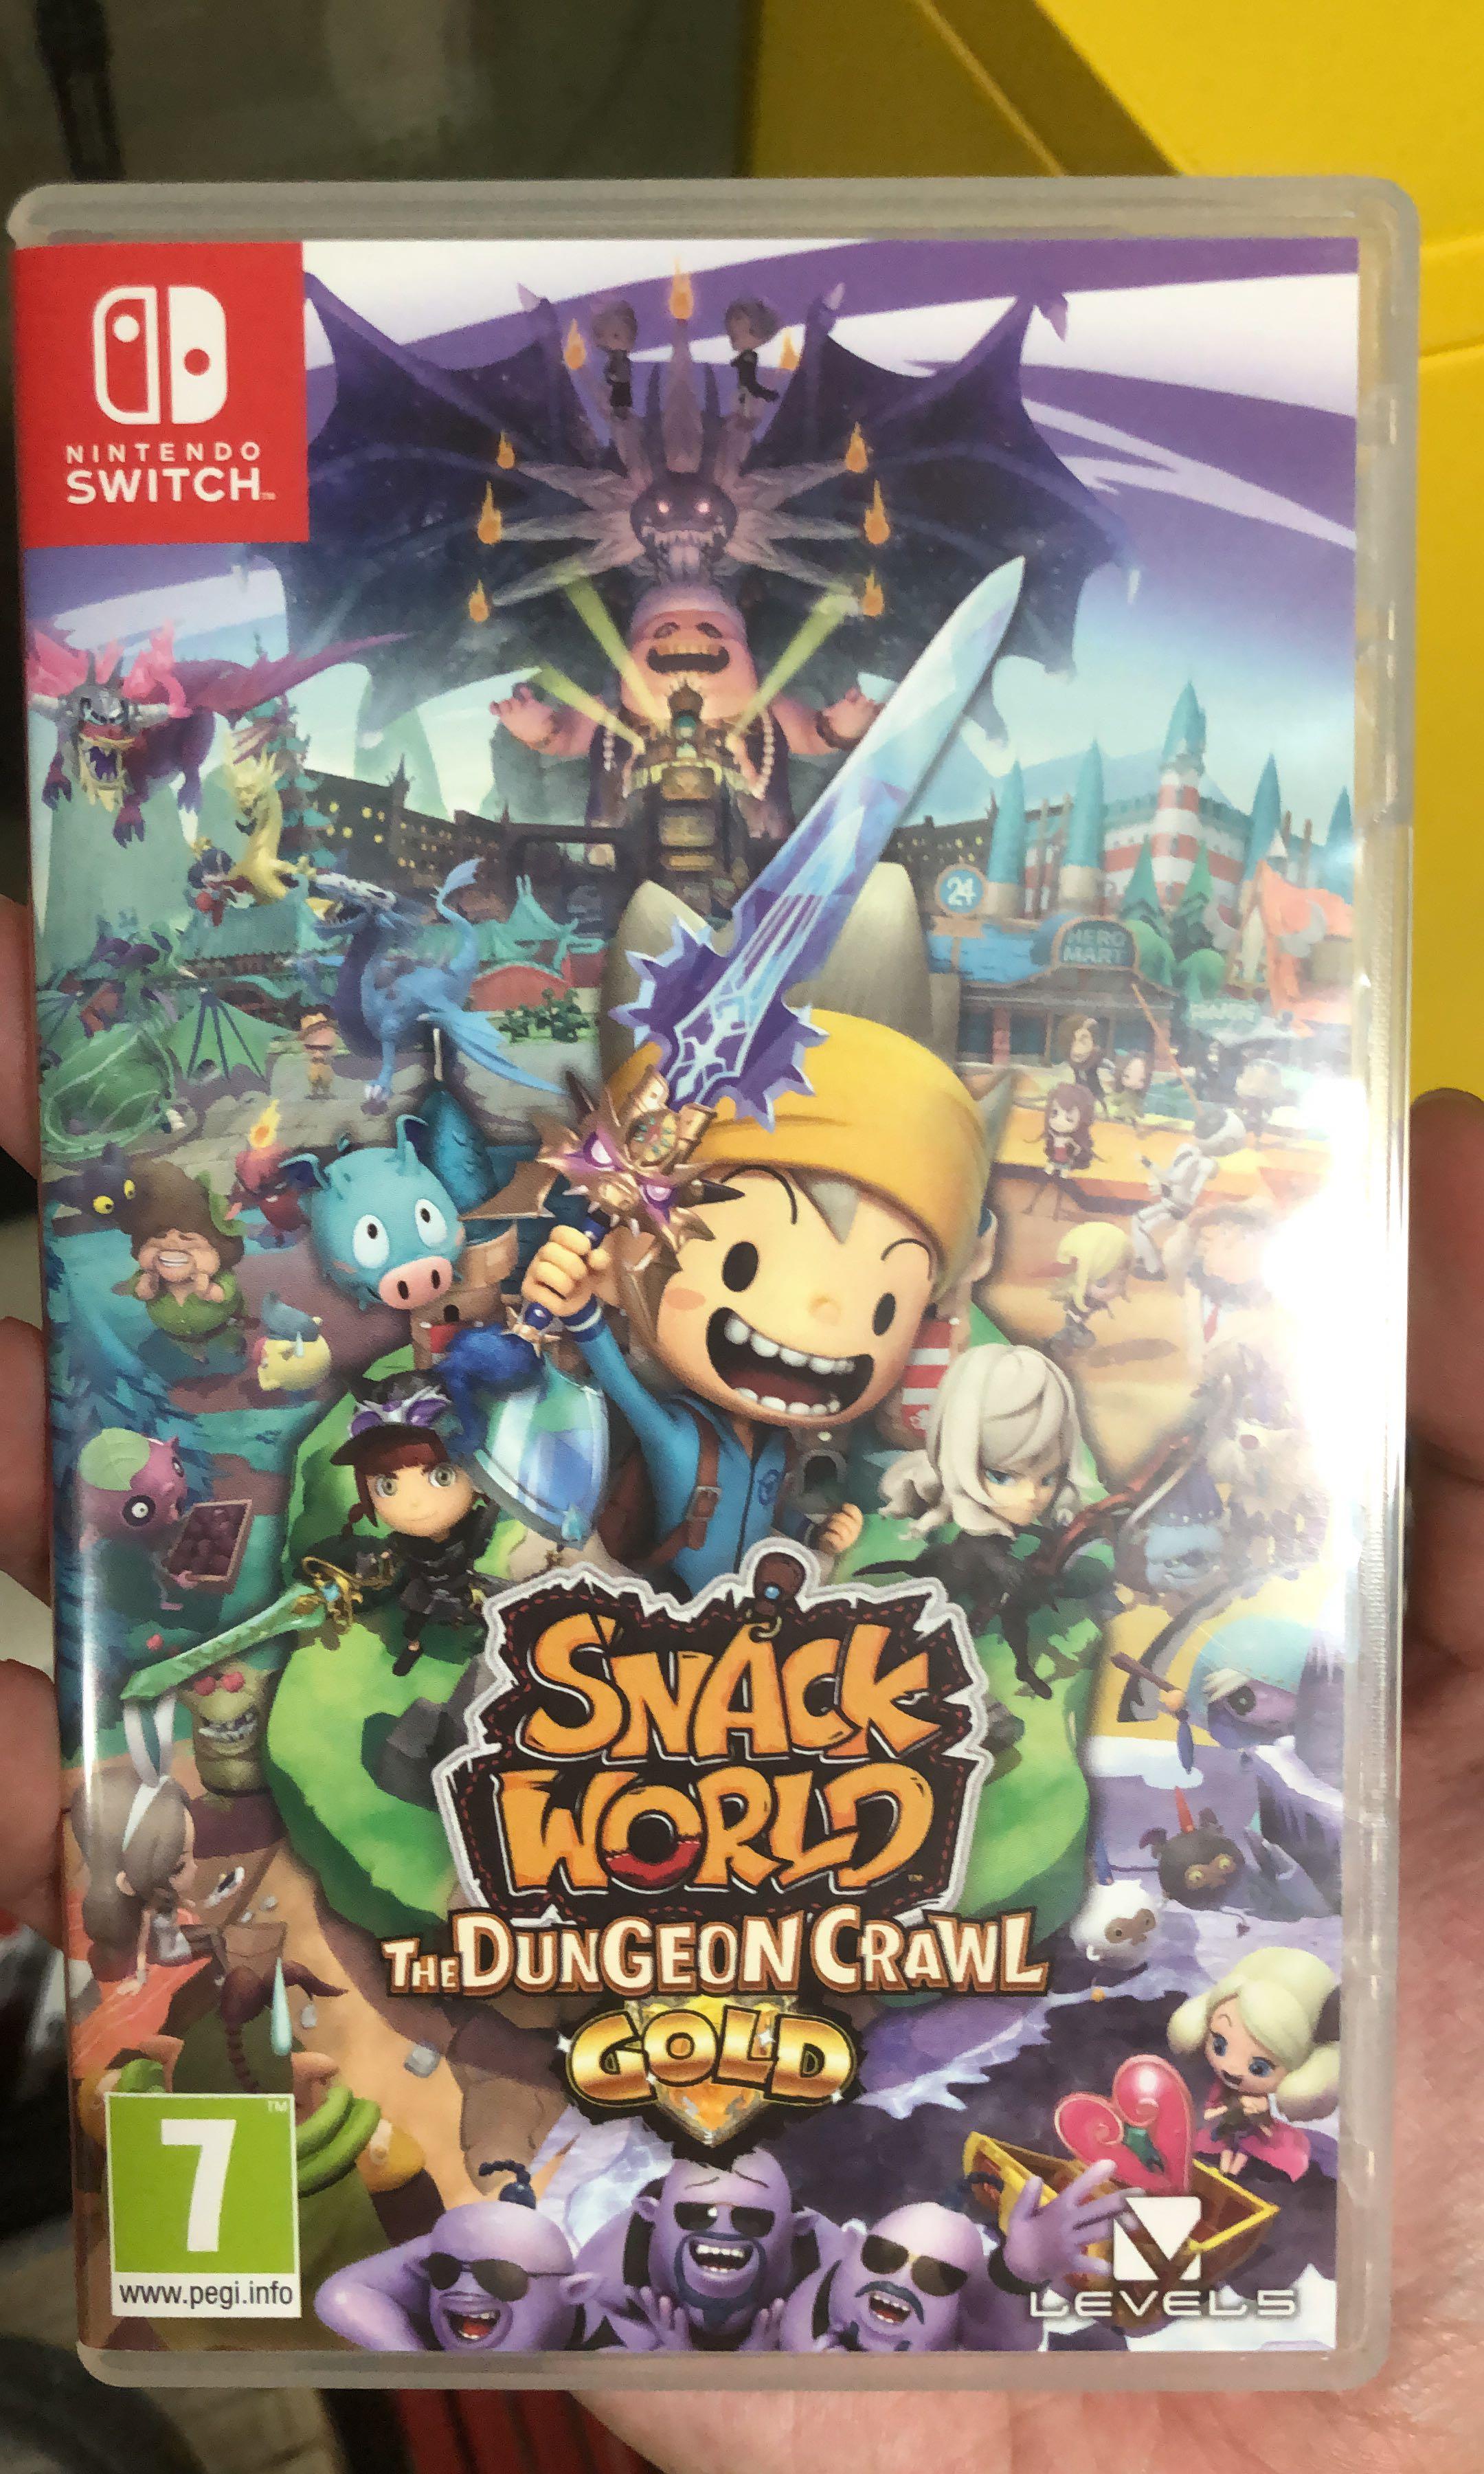 snack-world-dungeon-crawl-gold-nintendo-switch-video-gaming-video-games-nintendo-on-carousell